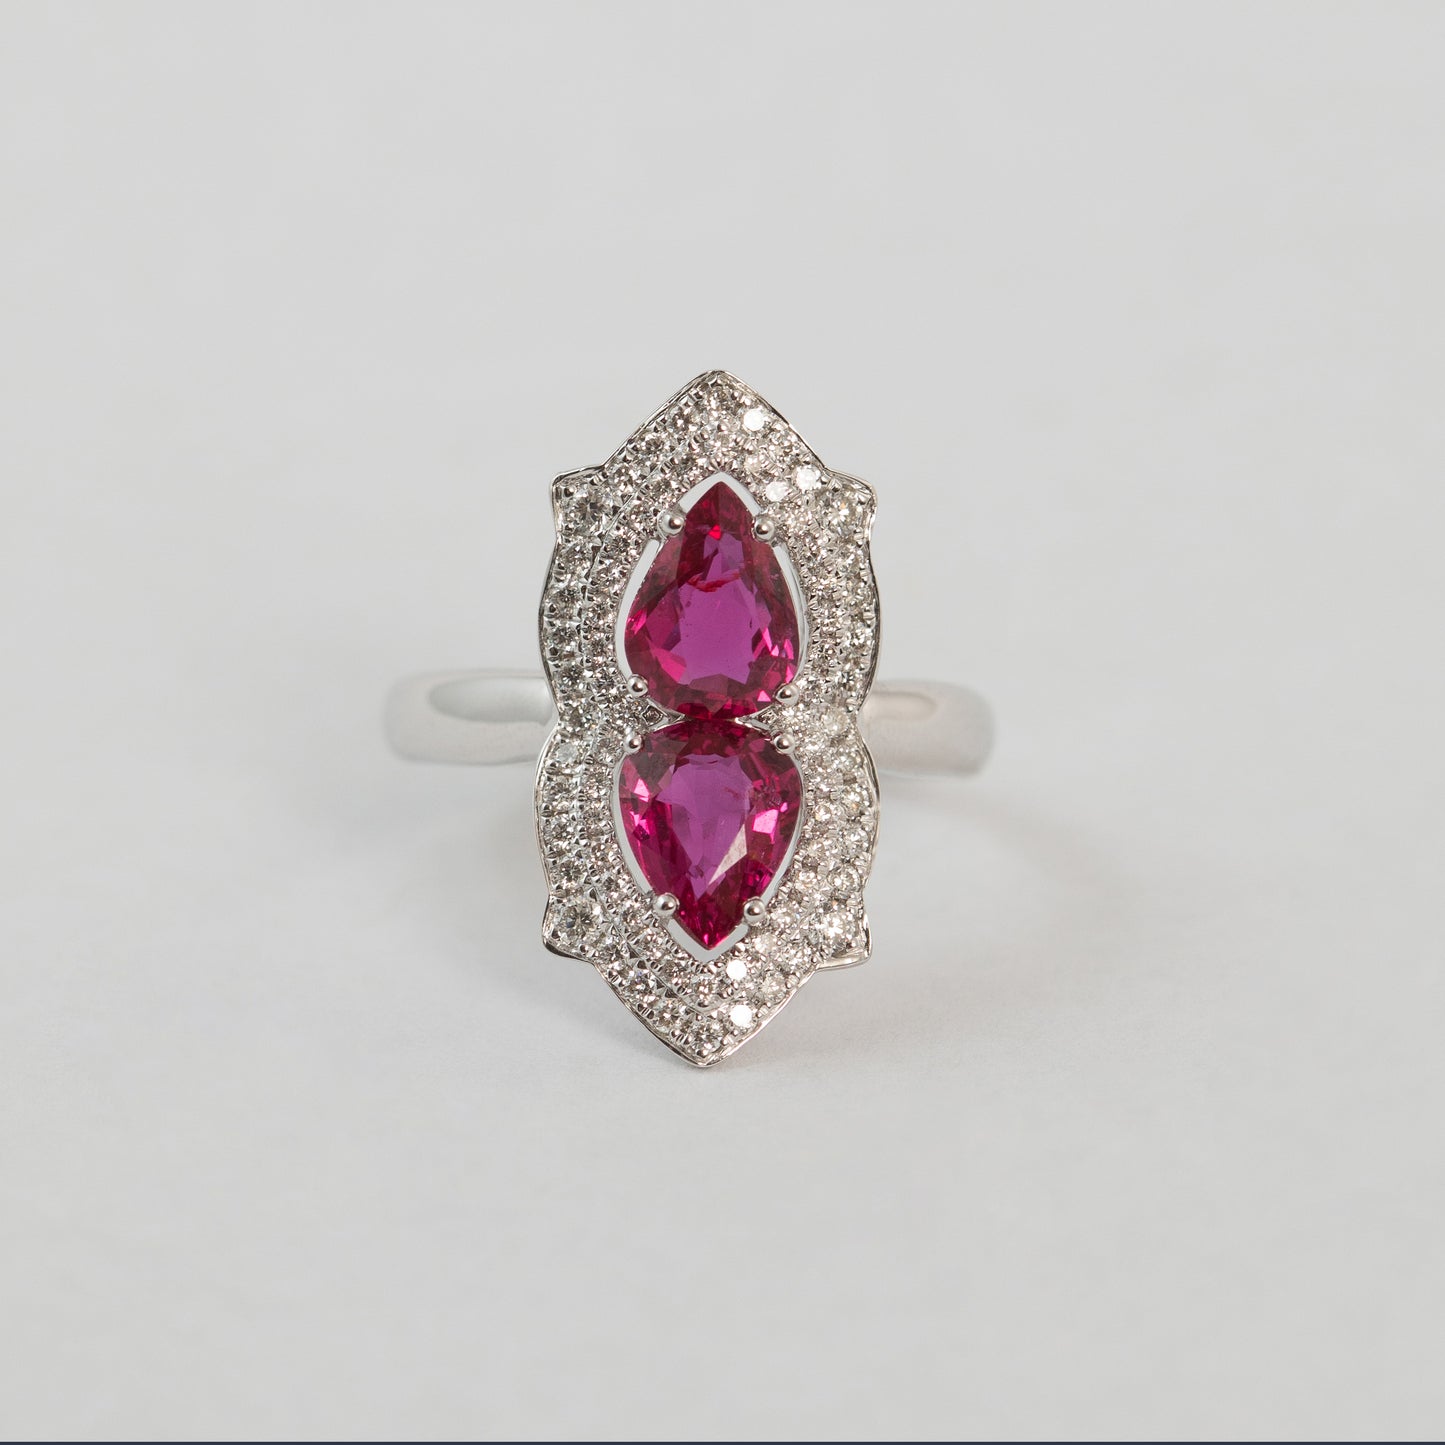 The Twin Flame Ruby Ring